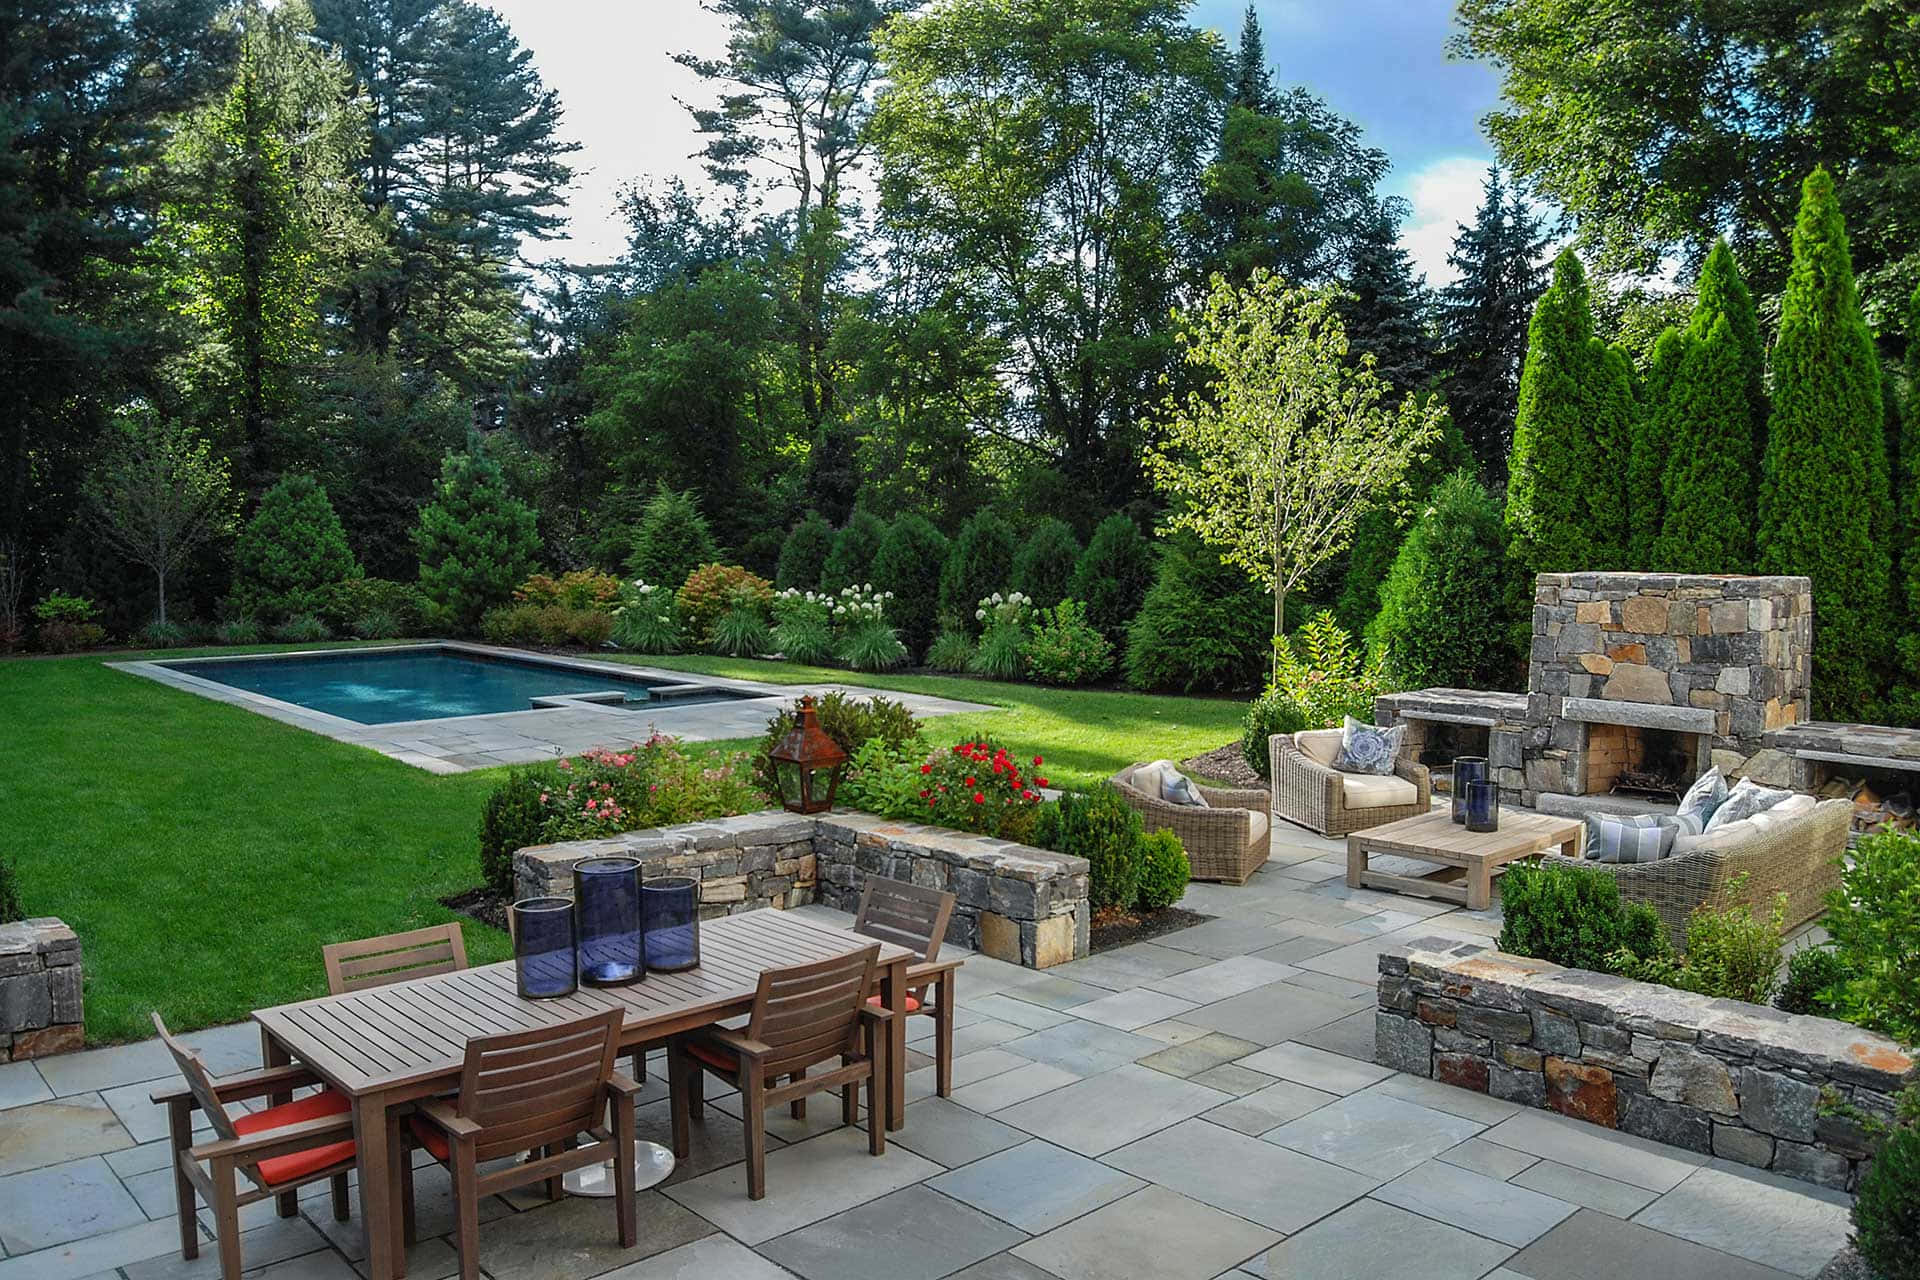 A Backyard With A Pool And Stone Patio